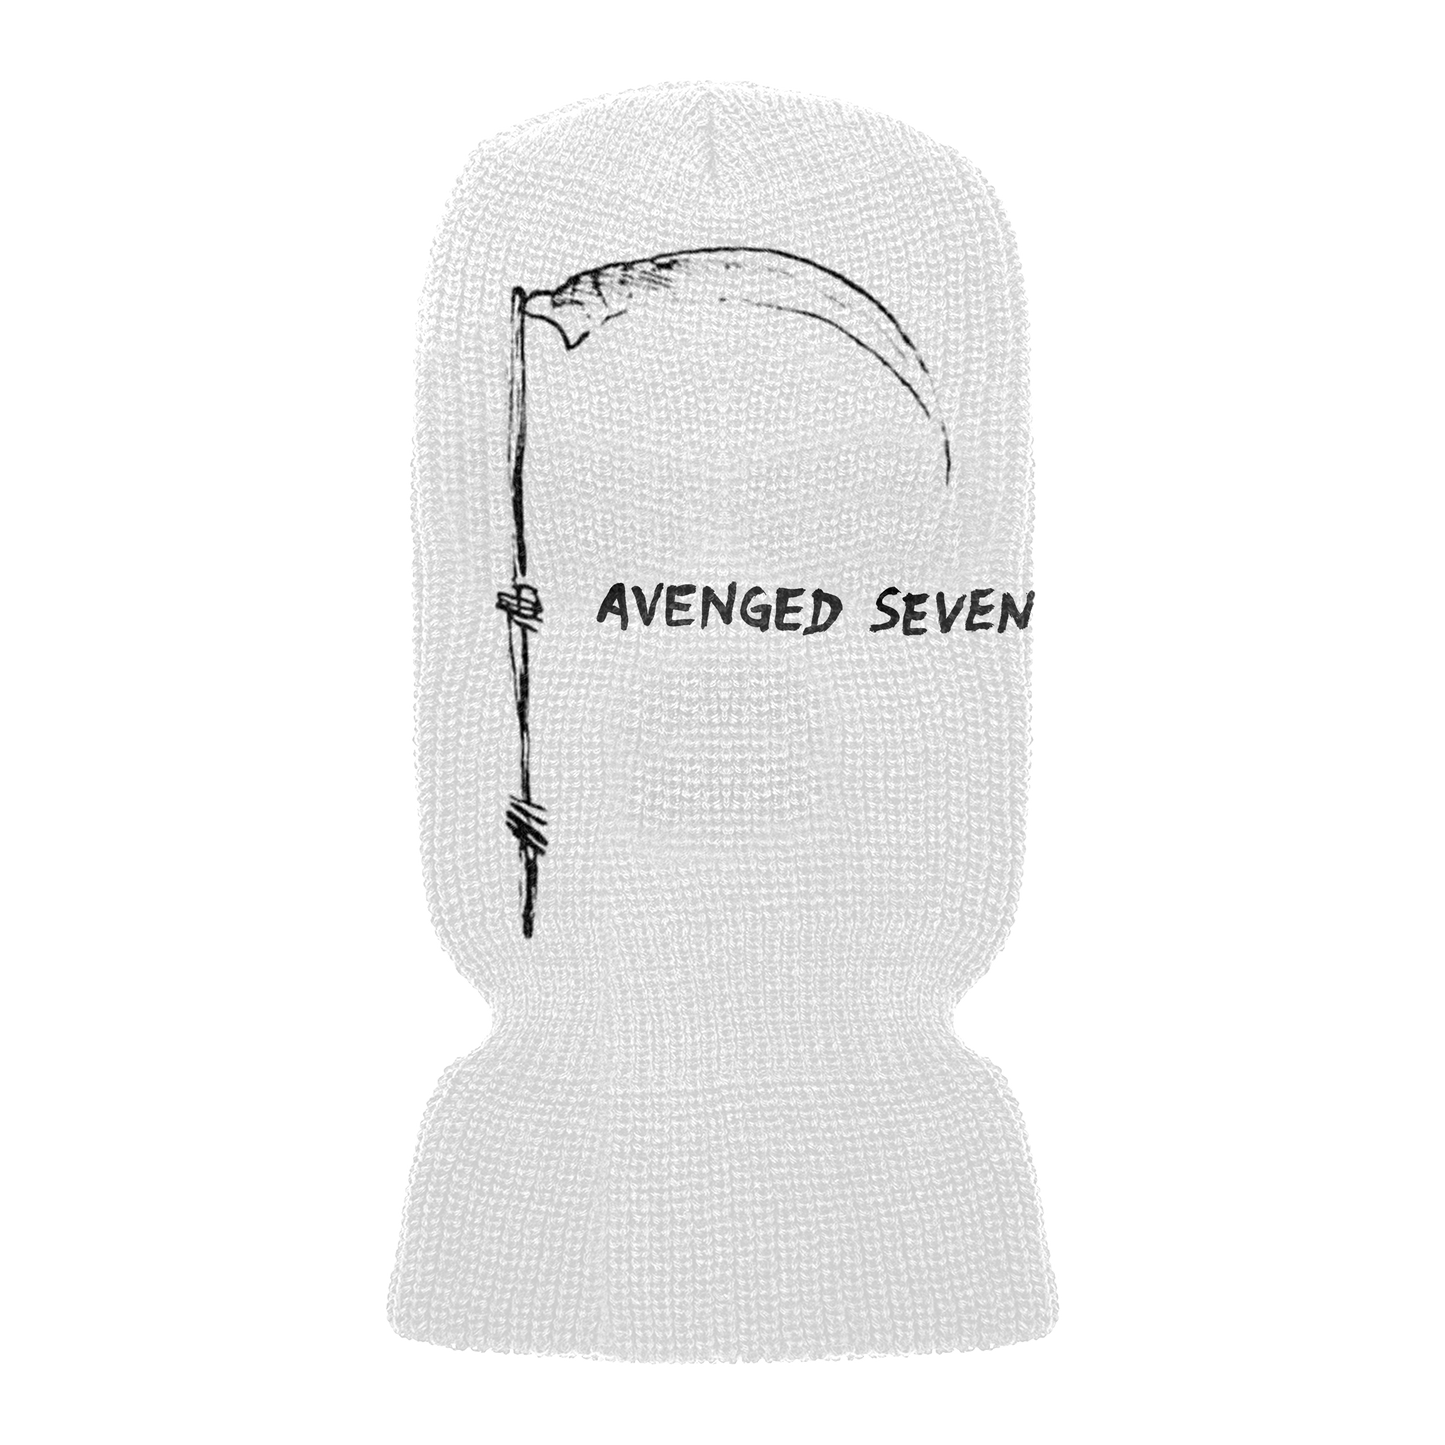 A7X + Pussy Riot Limited Edition Balaclava for Charity